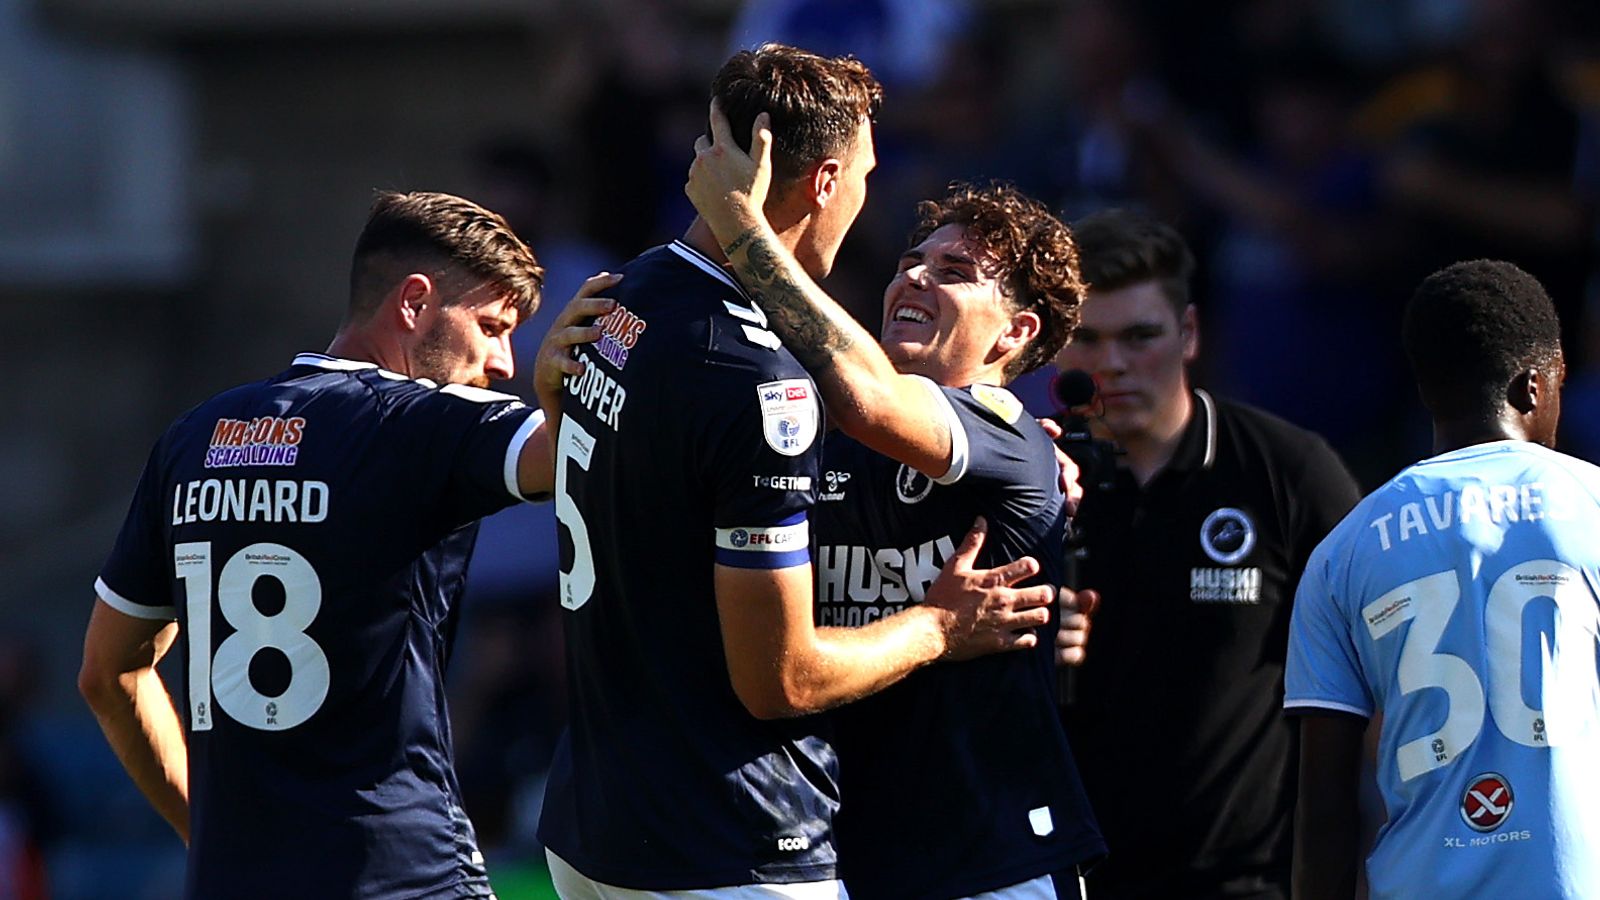 Sky Bet Championship, Coventry City 0 - 1 Millwall, 2021-2022